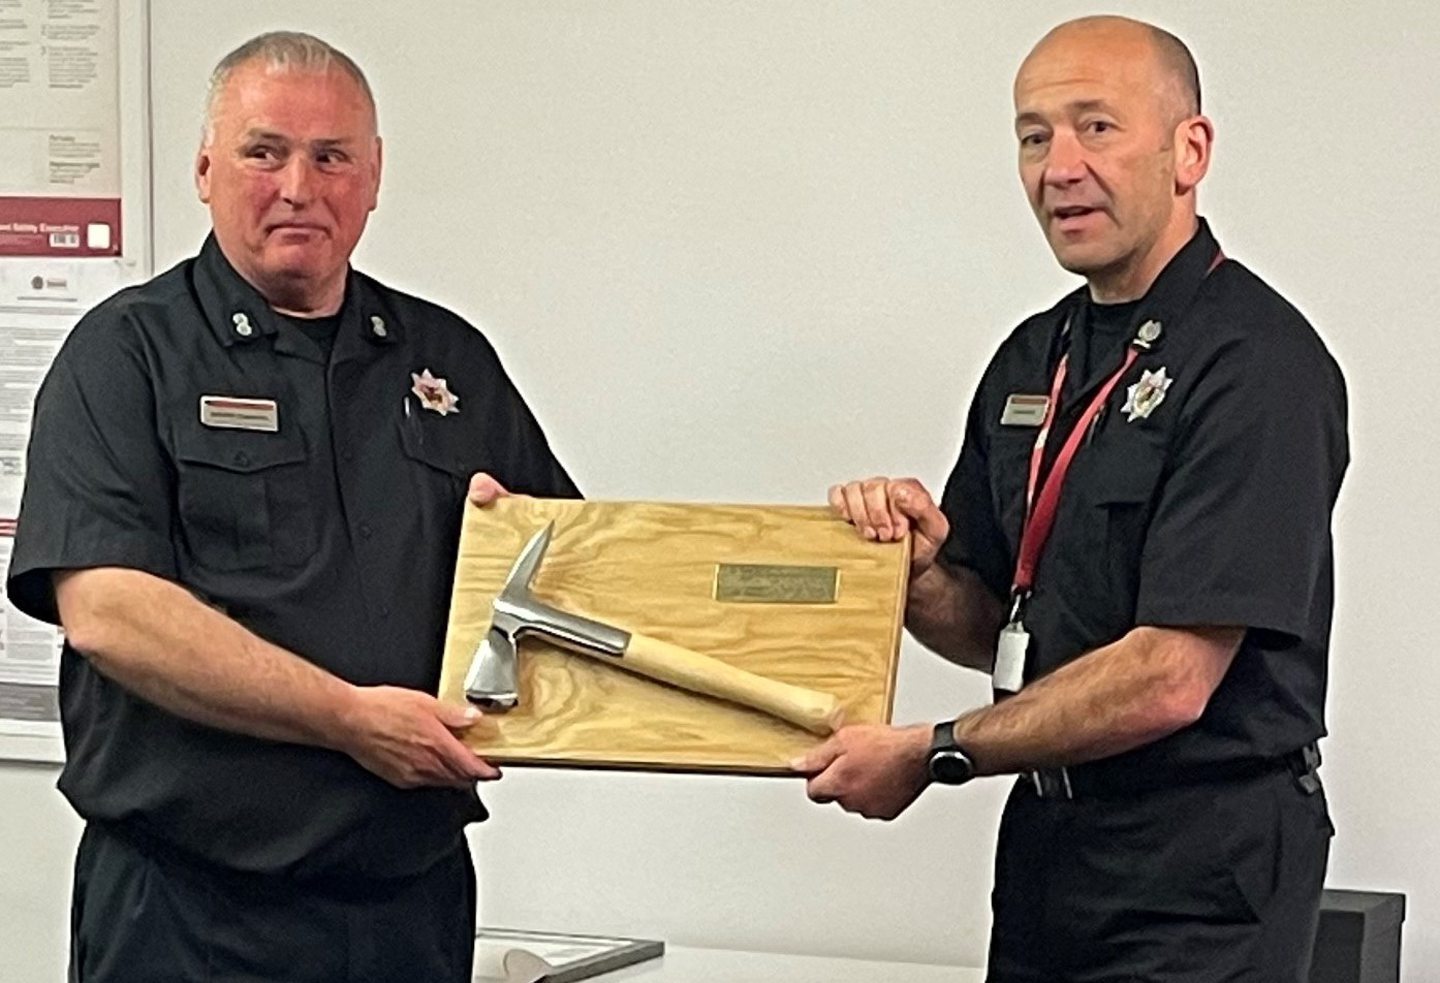 George Ferguson receives fire service axe from Scottish Fire and Rescue Service area commander Jason Sharp in Comrie.